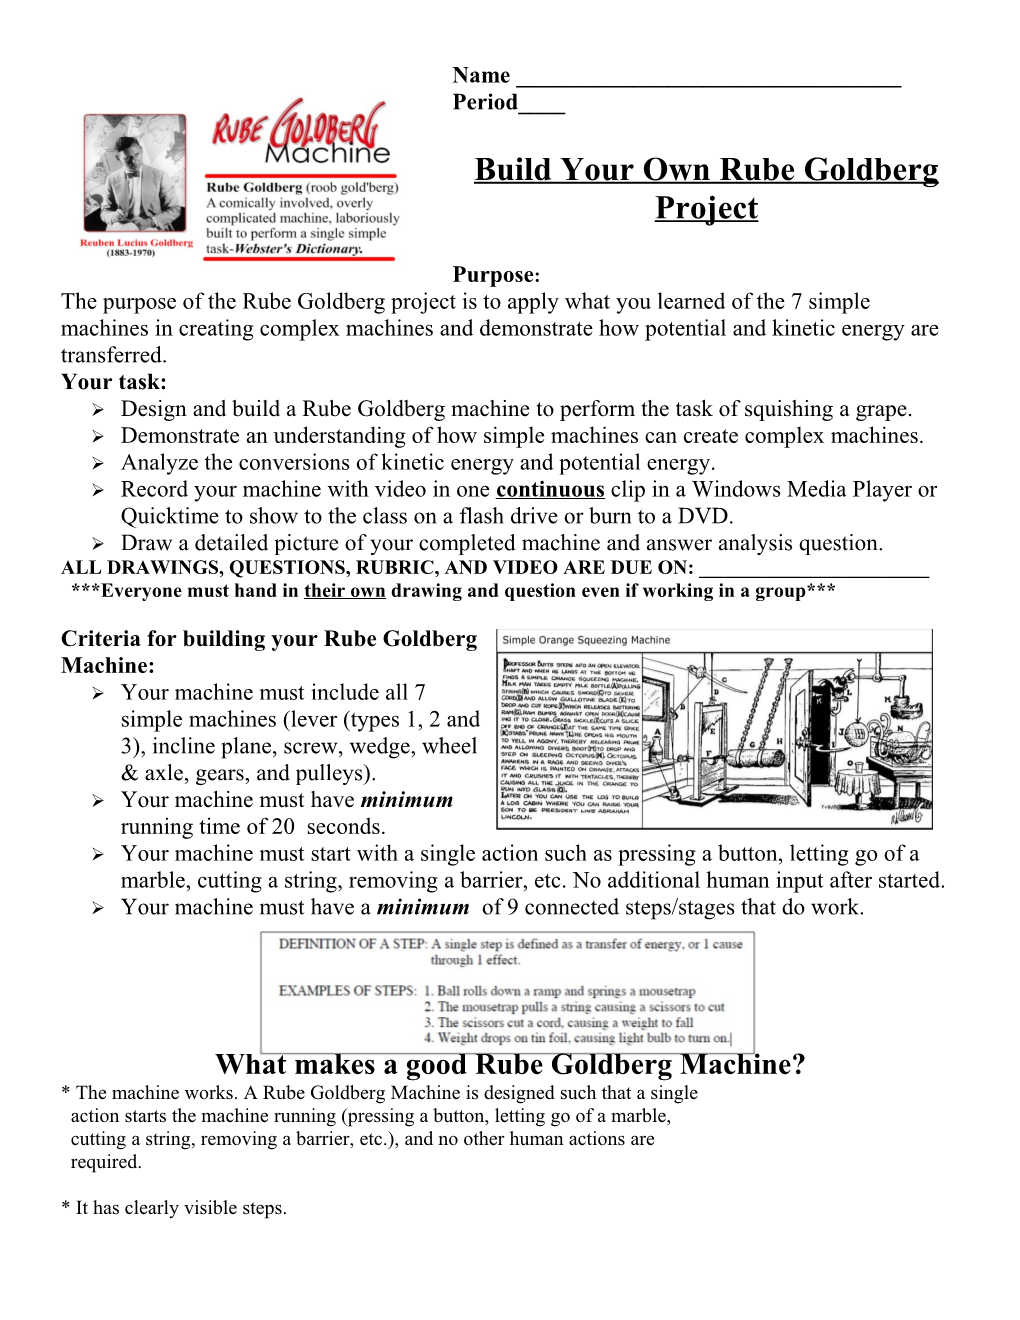 Build Your Own Rube Goldberg Project